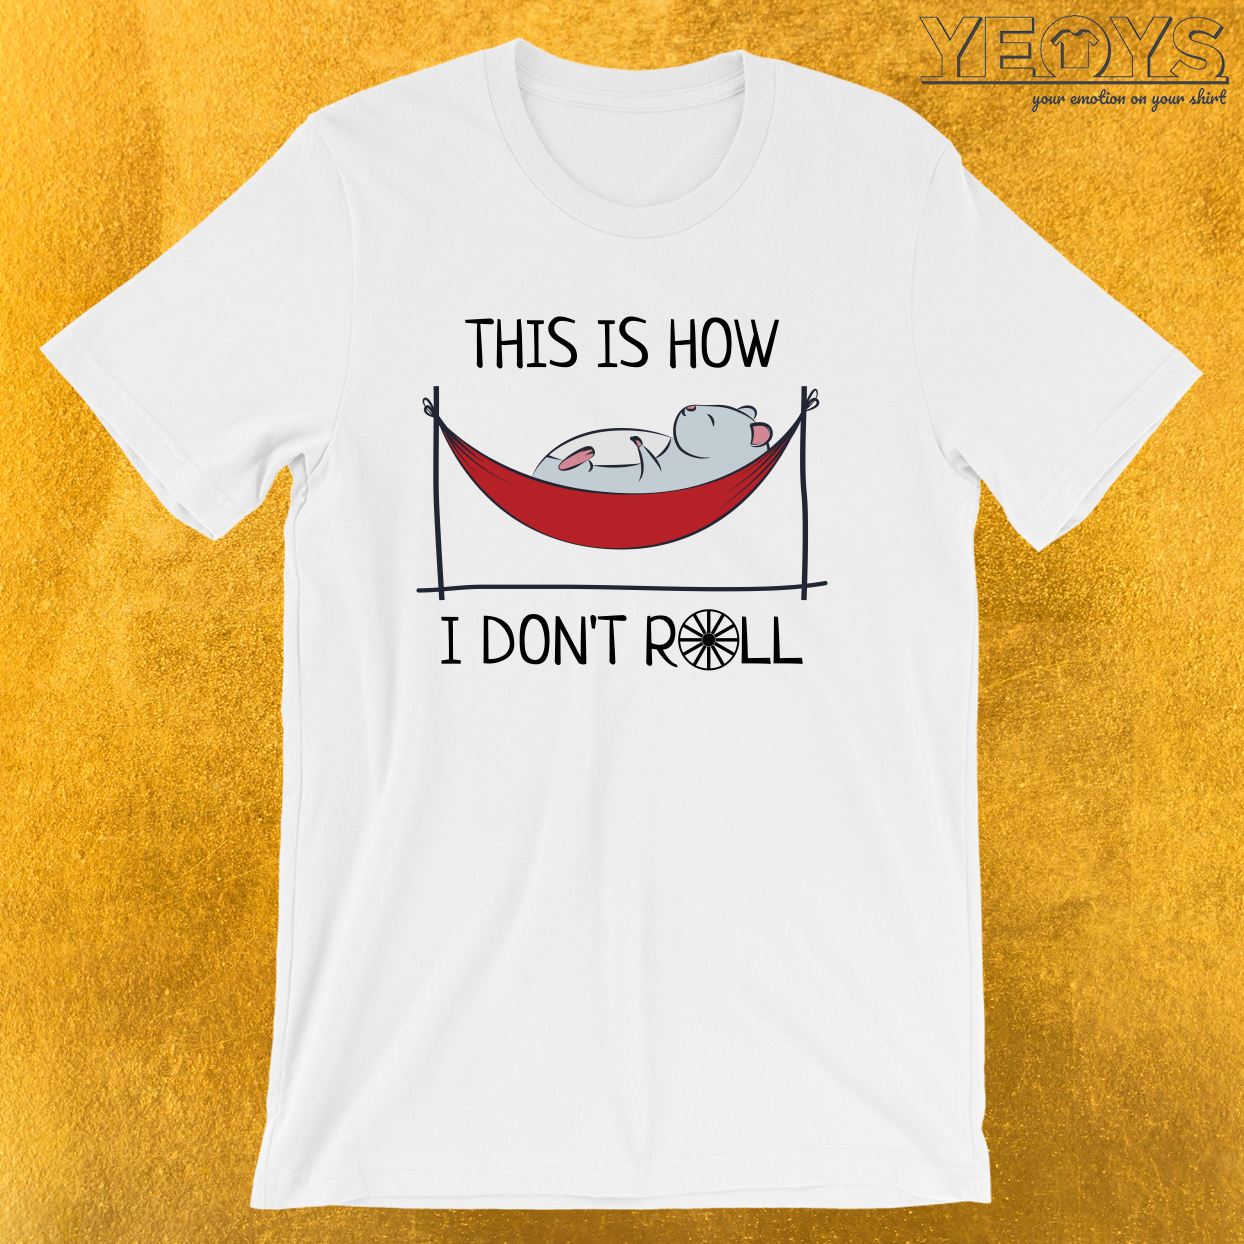 This Is How I Don’t Roll – Hamster Tee